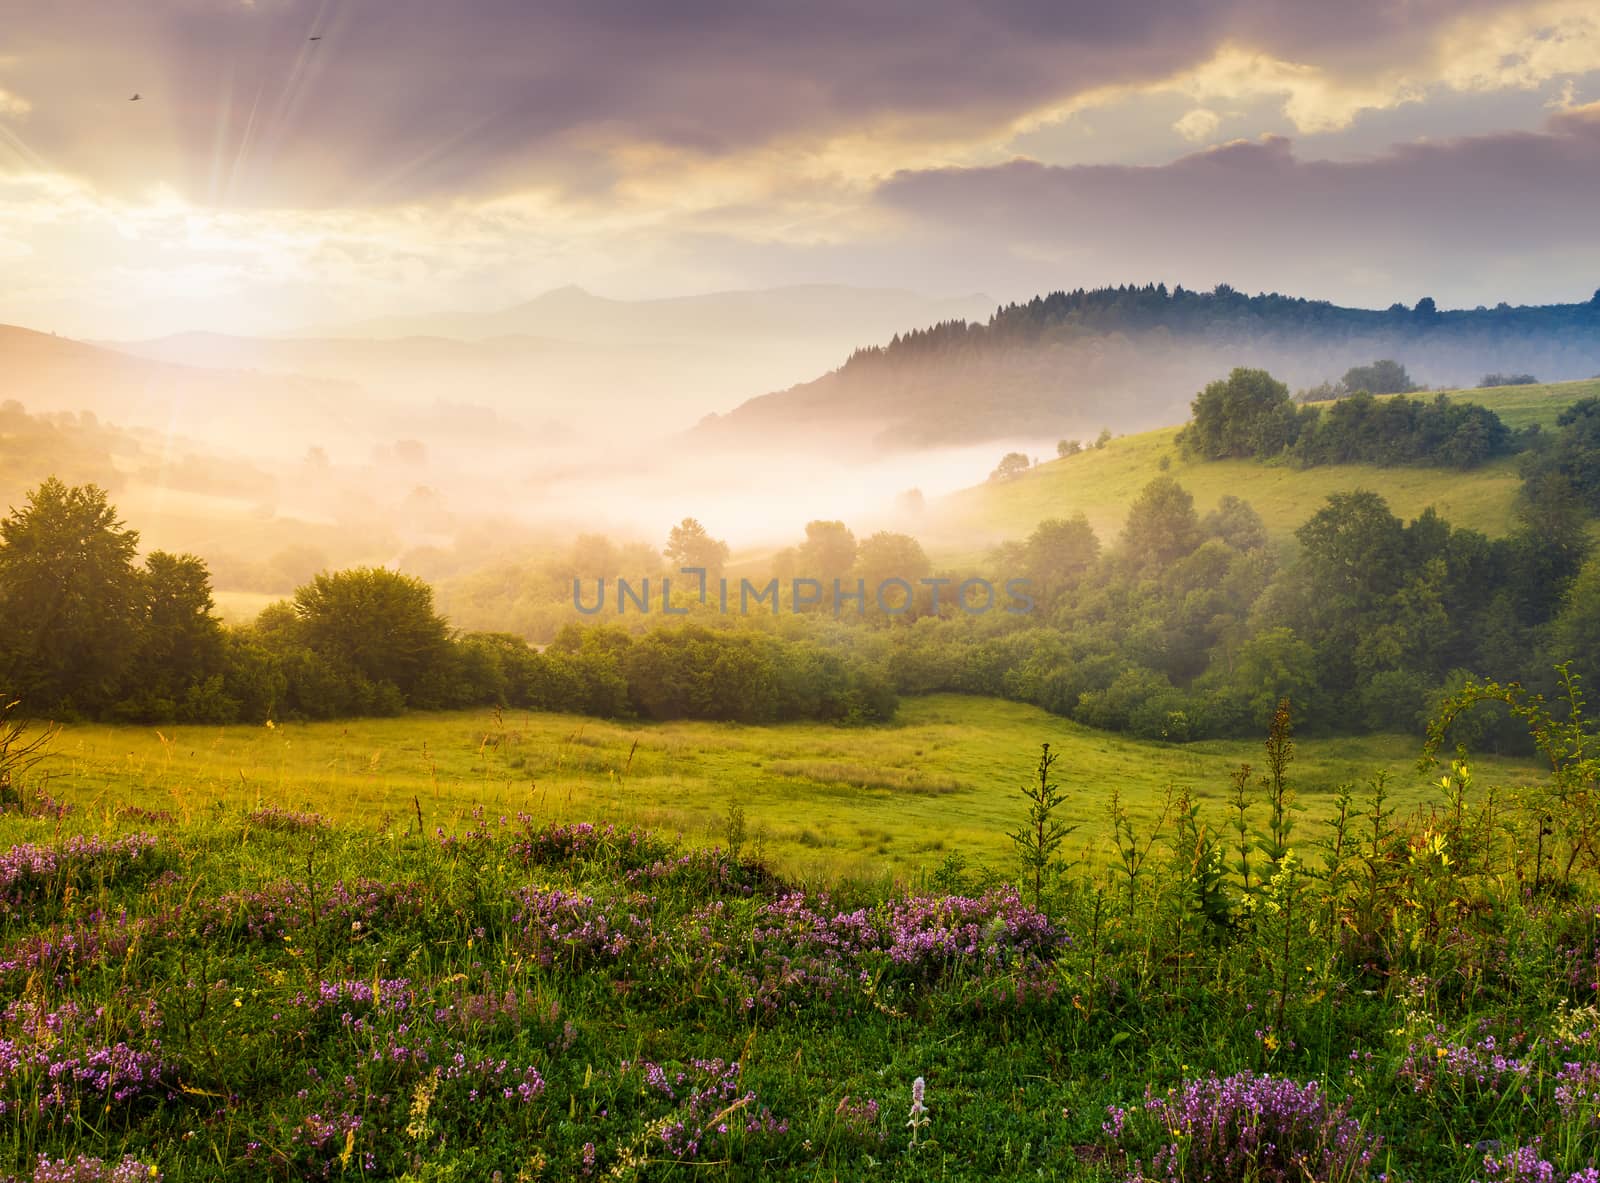 gorgeous foggy sunrise in Carpathian mountains. lovely summer landscape of Volovets district. purple flowers on grassy meadows and forested hill in fog. mountain Pikui in the distance.